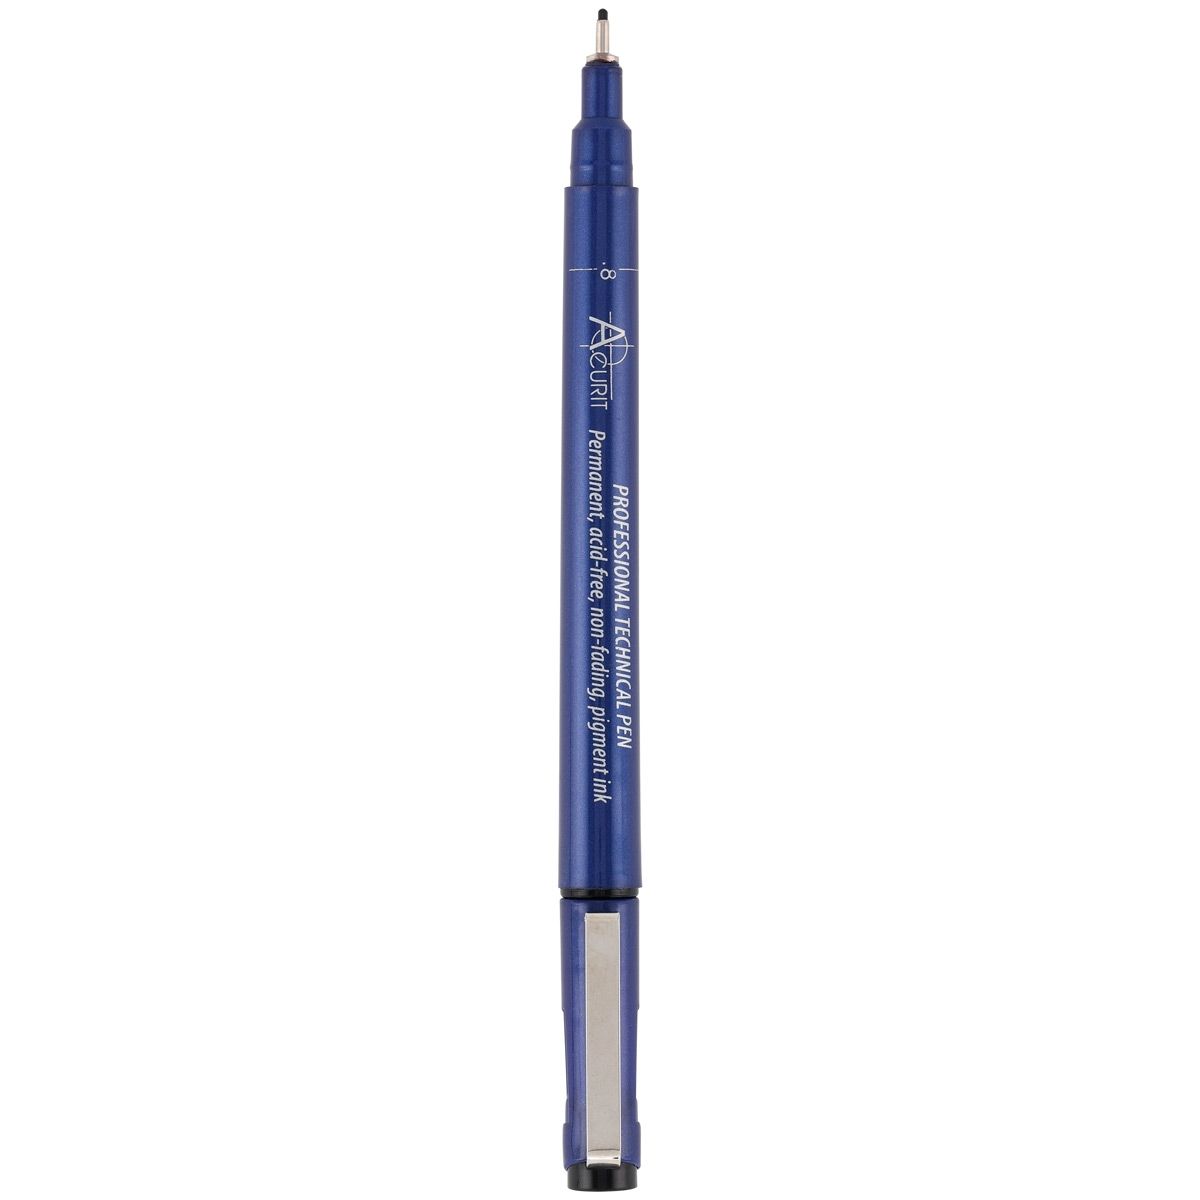 Acurit Technical Drawing Pen 0.80mm